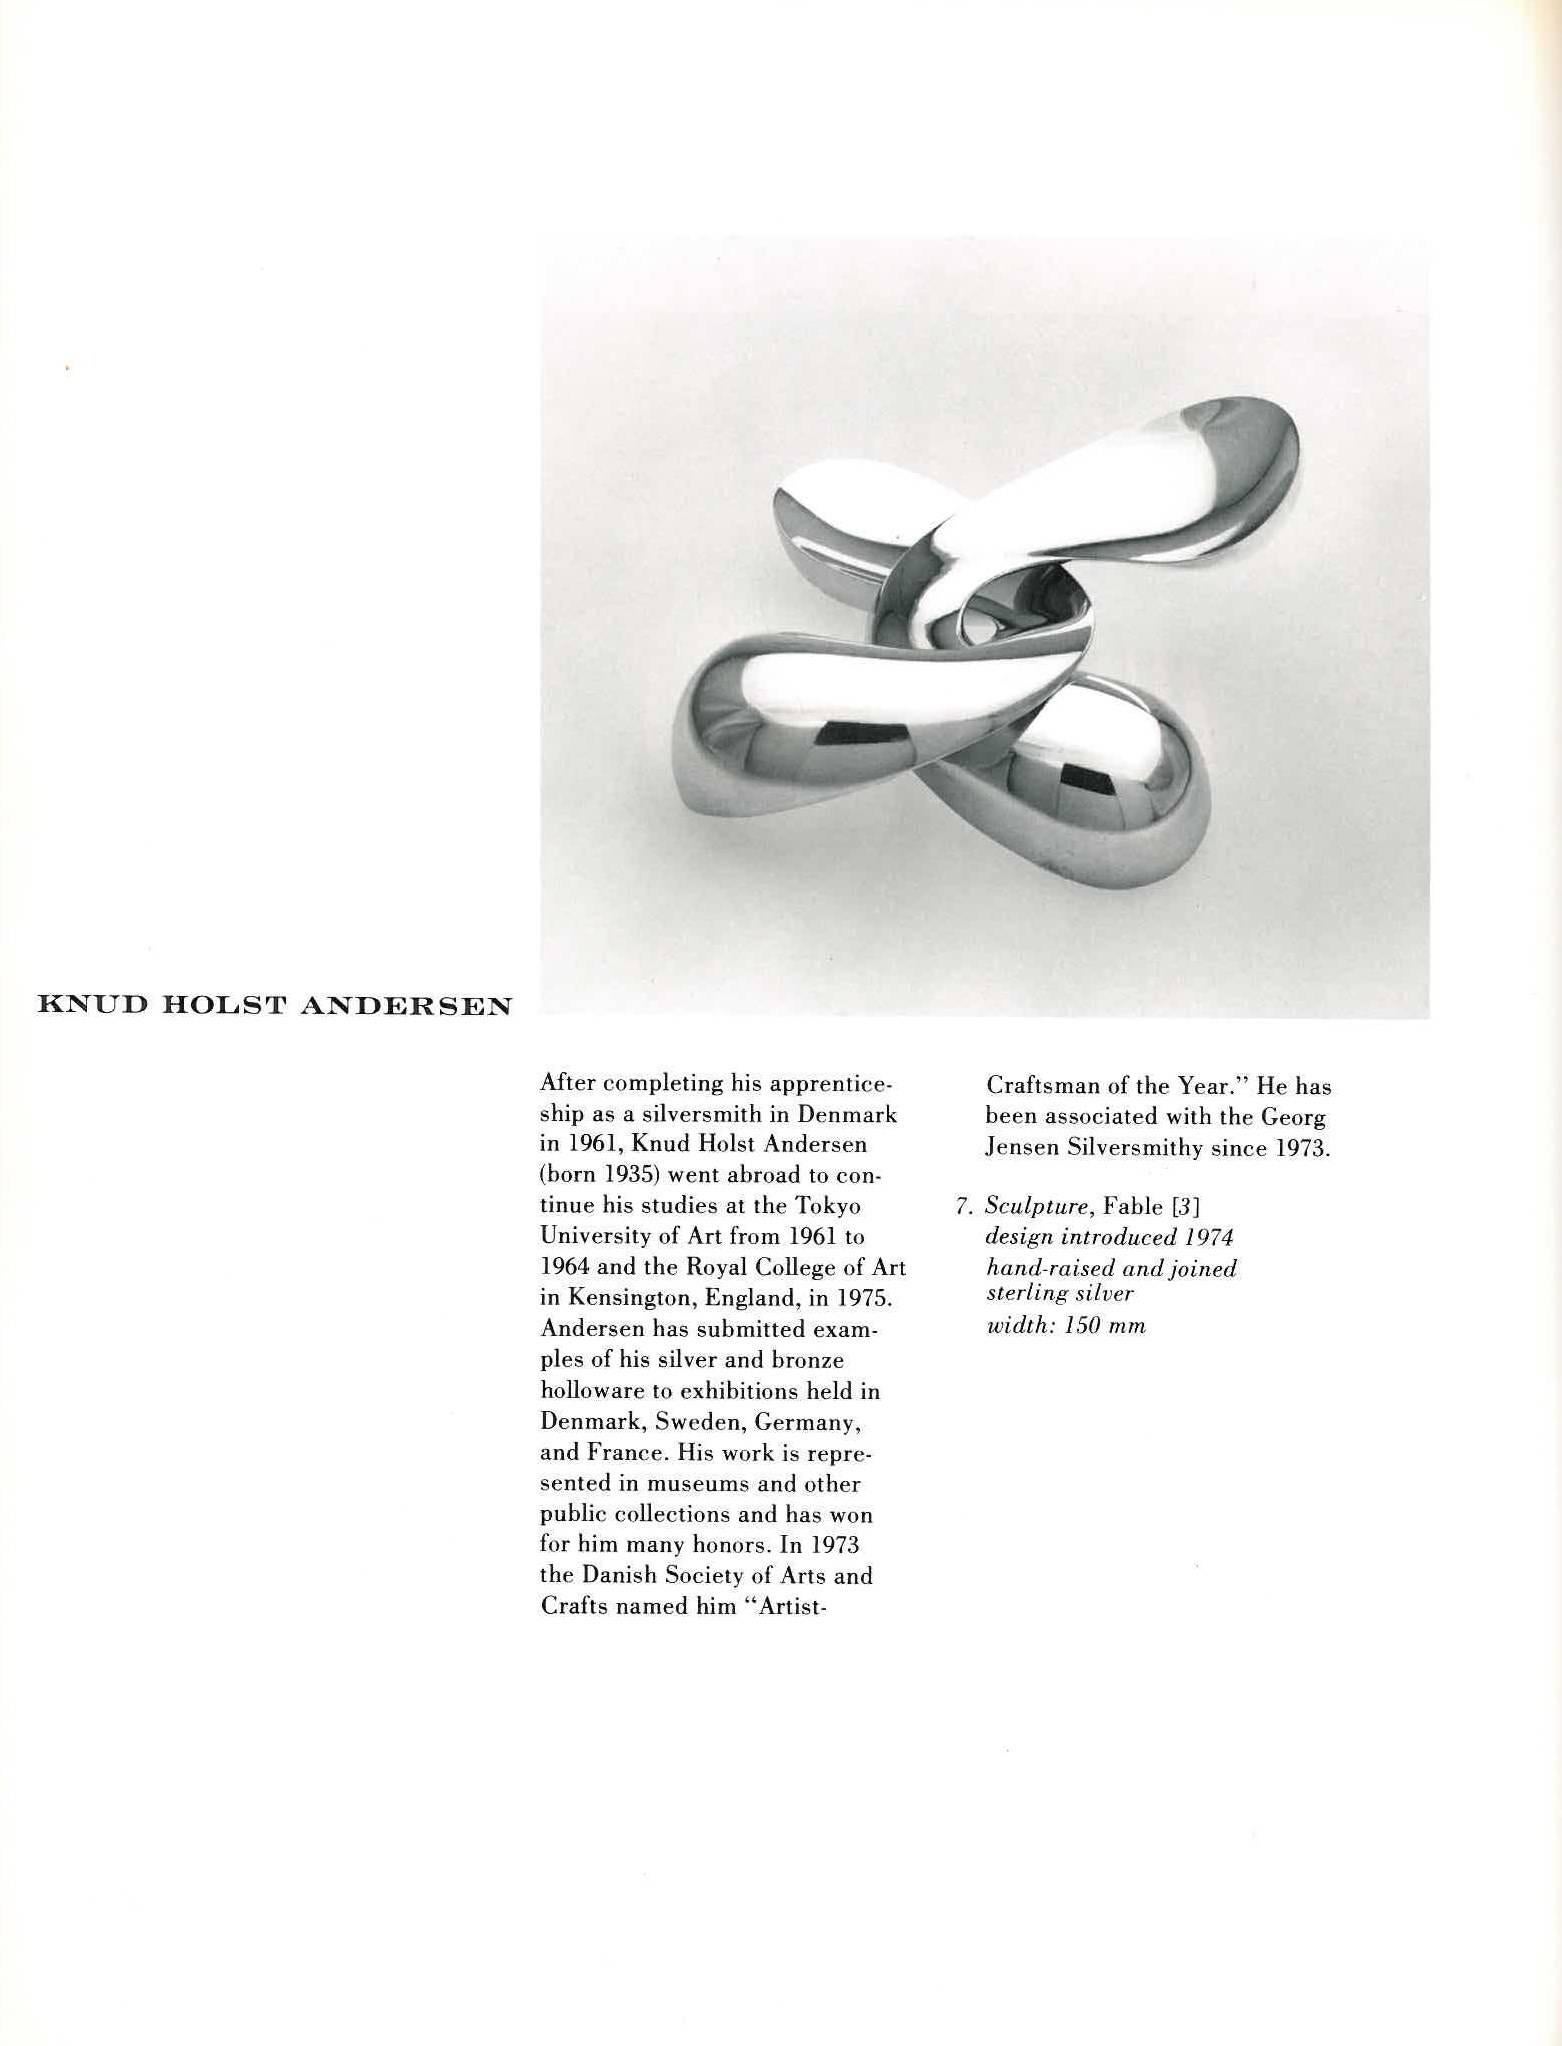 This catalogue was published on the occasion of an exhibition organised and held at the Renwick Gallery, Smithsonian Institute in Washington DC. With 147 pieces illustrated, company marks and selected bibliography. The Georg Jensen Silversithy which